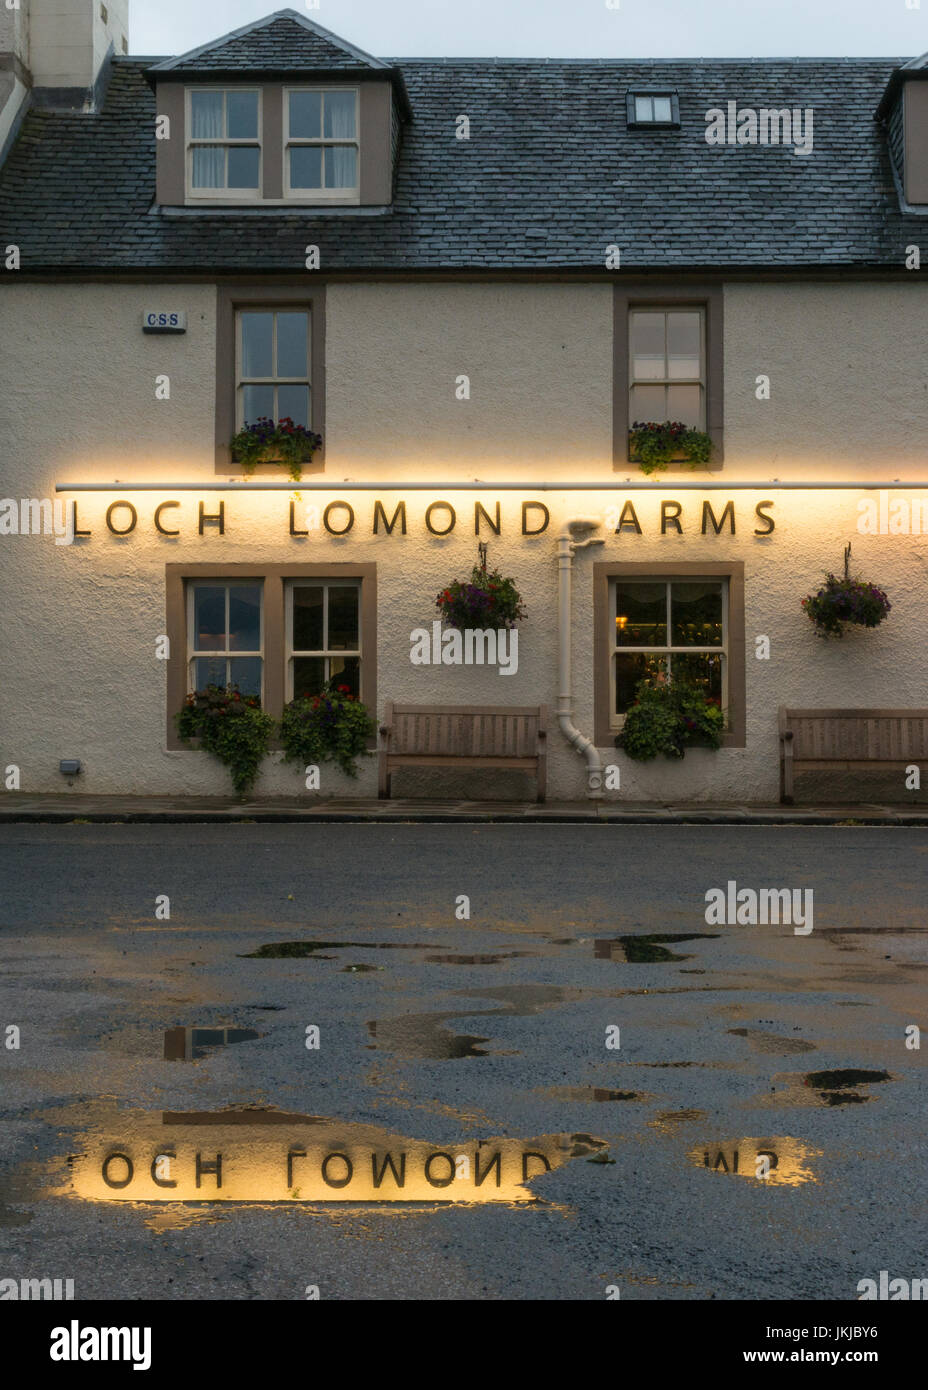 Loch Lomond Arms Hotel, Country Pub and Hotel, Luss, Scotland, UK Stock Photo